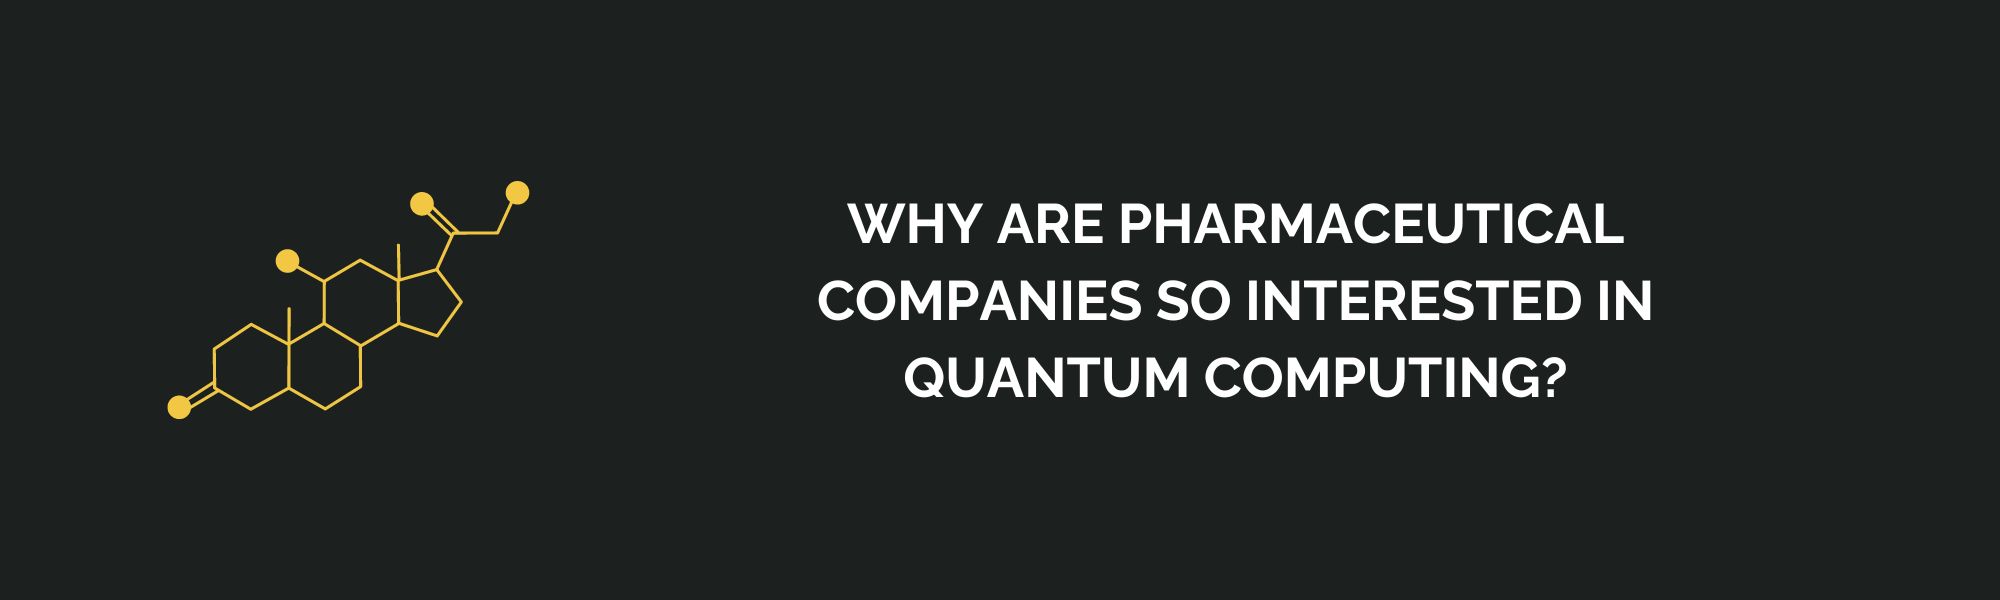 Why Are Pharmaceutical Companies So Interested in Quantum Computing?